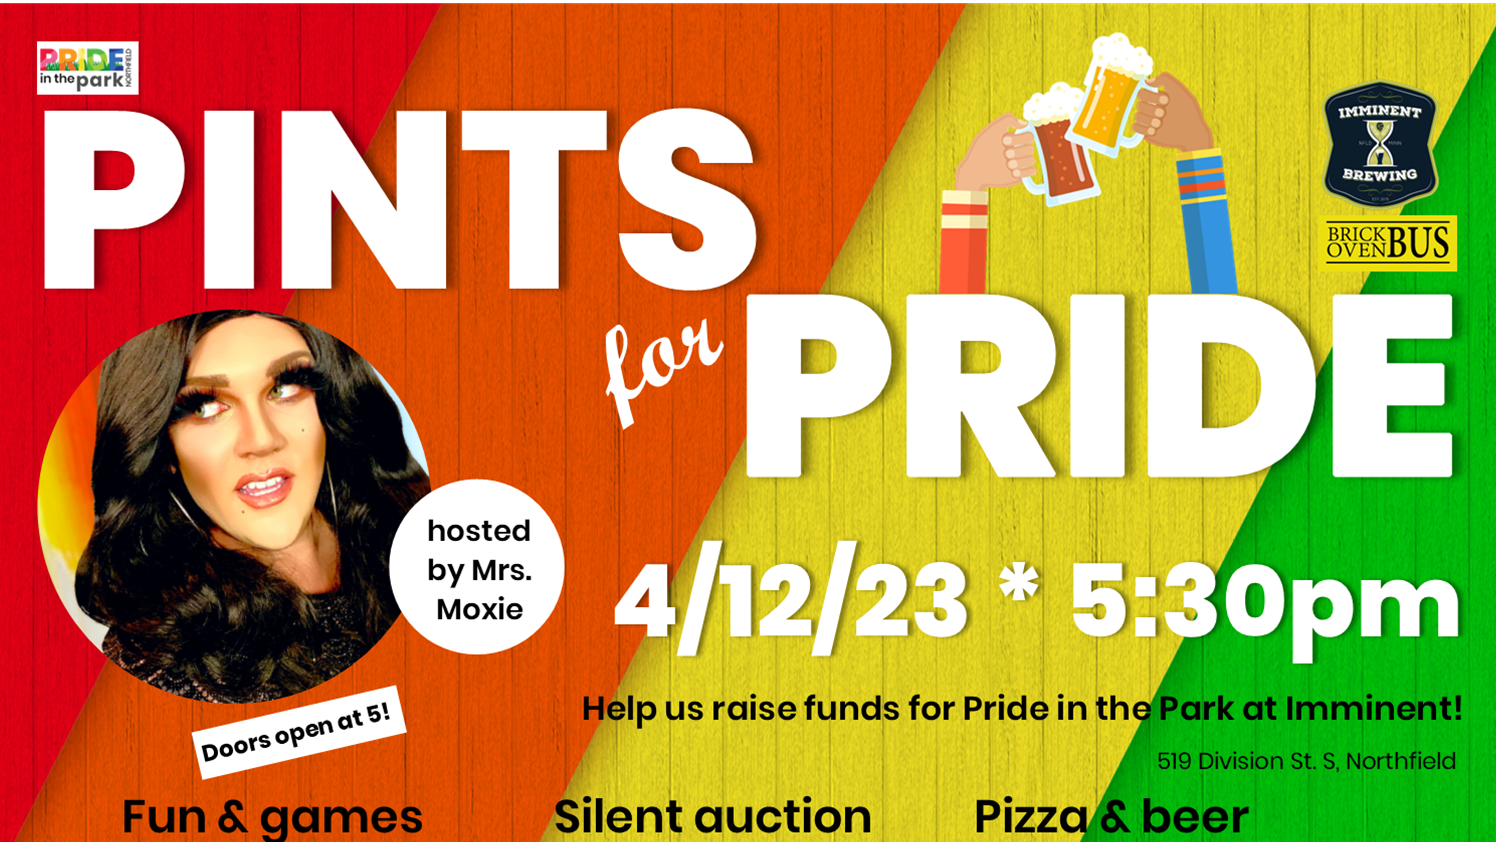 Pints for Pride Fundraiser at Imminent on April 12